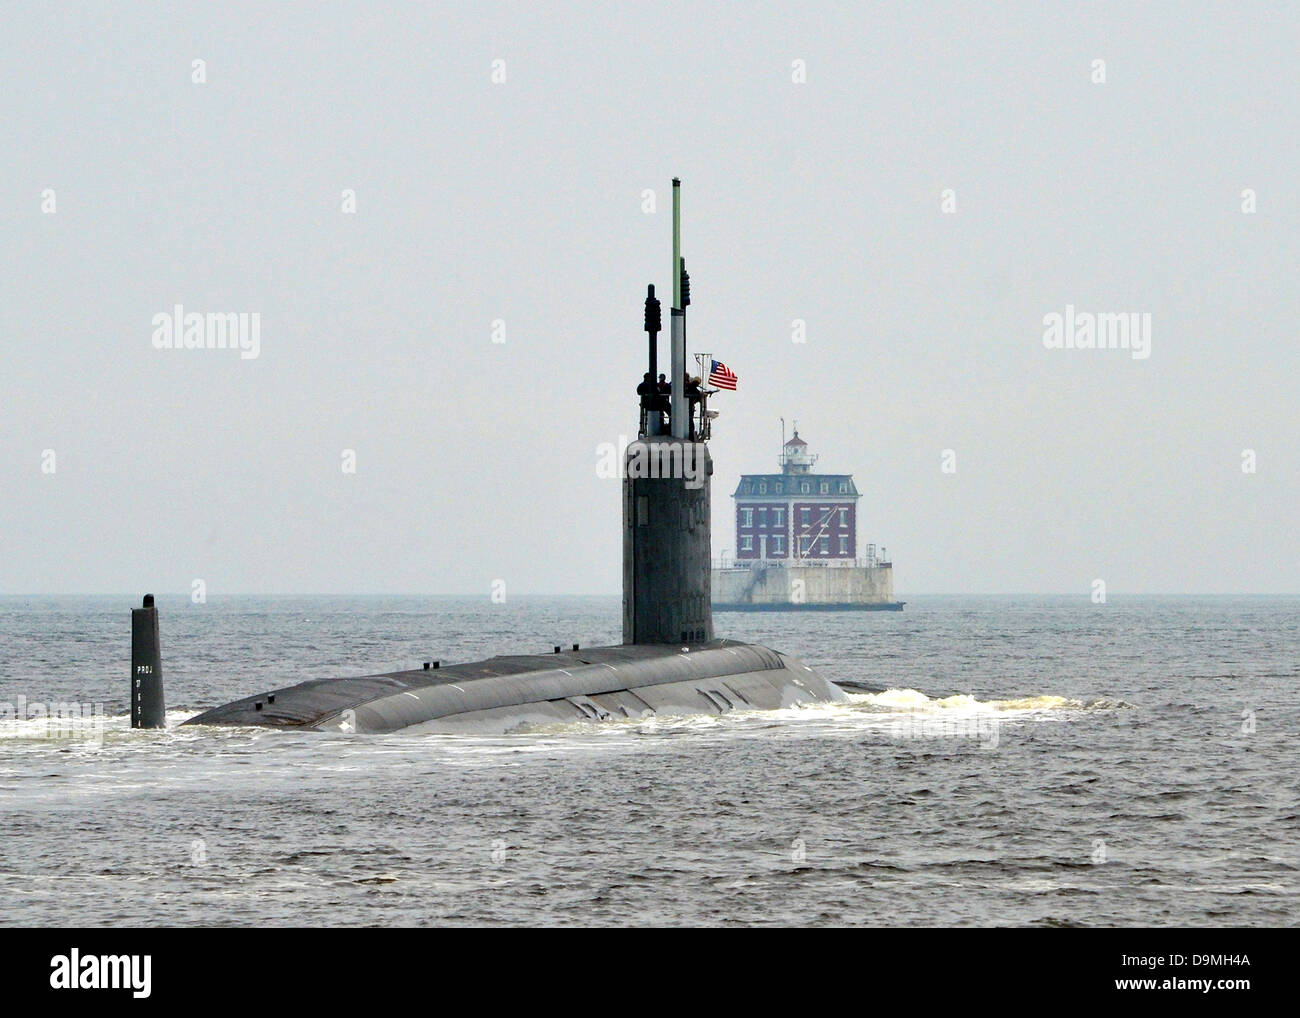 US Navy Virginia-class attack submarine USS Missouri exits the Thames River as it departs Naval Submarine Base New London June 18, 2013 in Groton, CT. Stock Photo